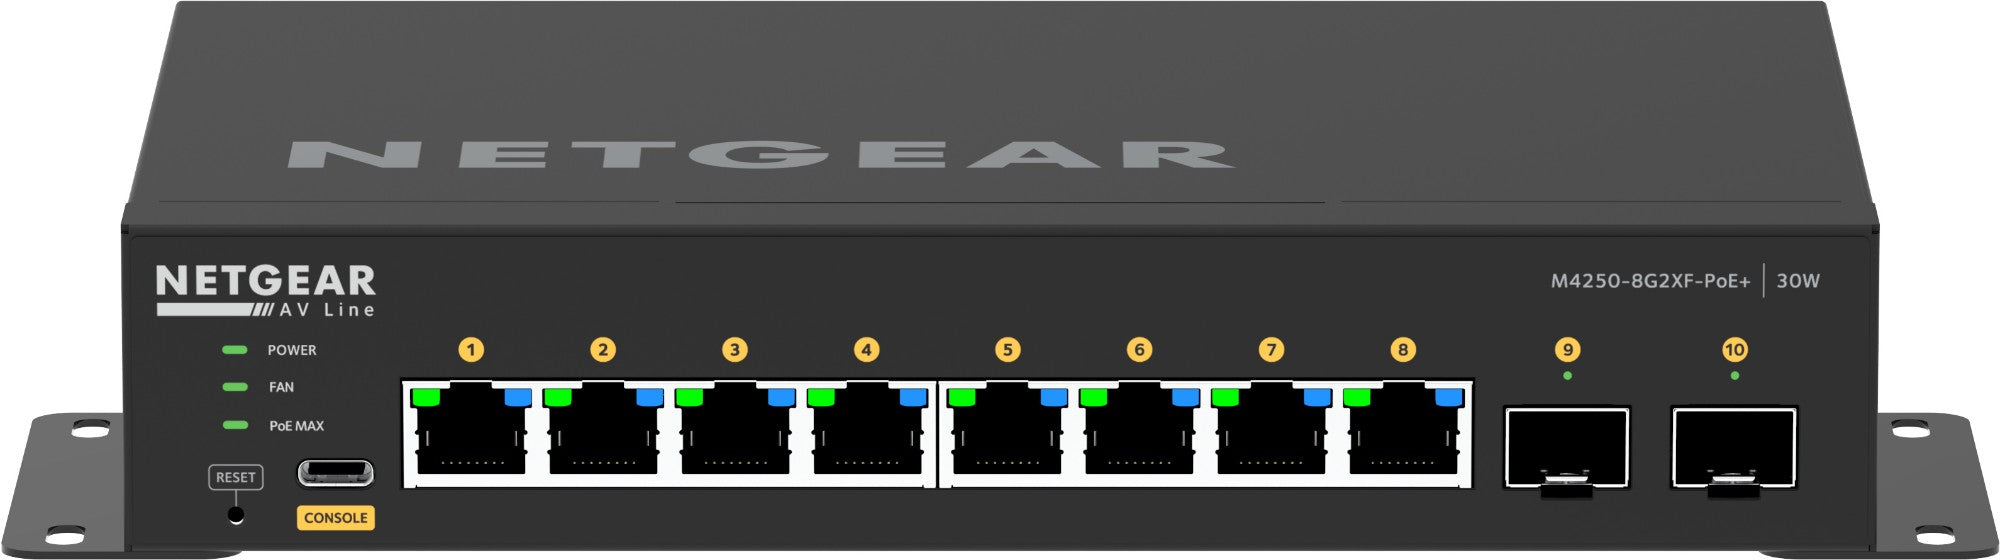 8x1G PoE+ 220W and 2xSFP+ Managed Switch